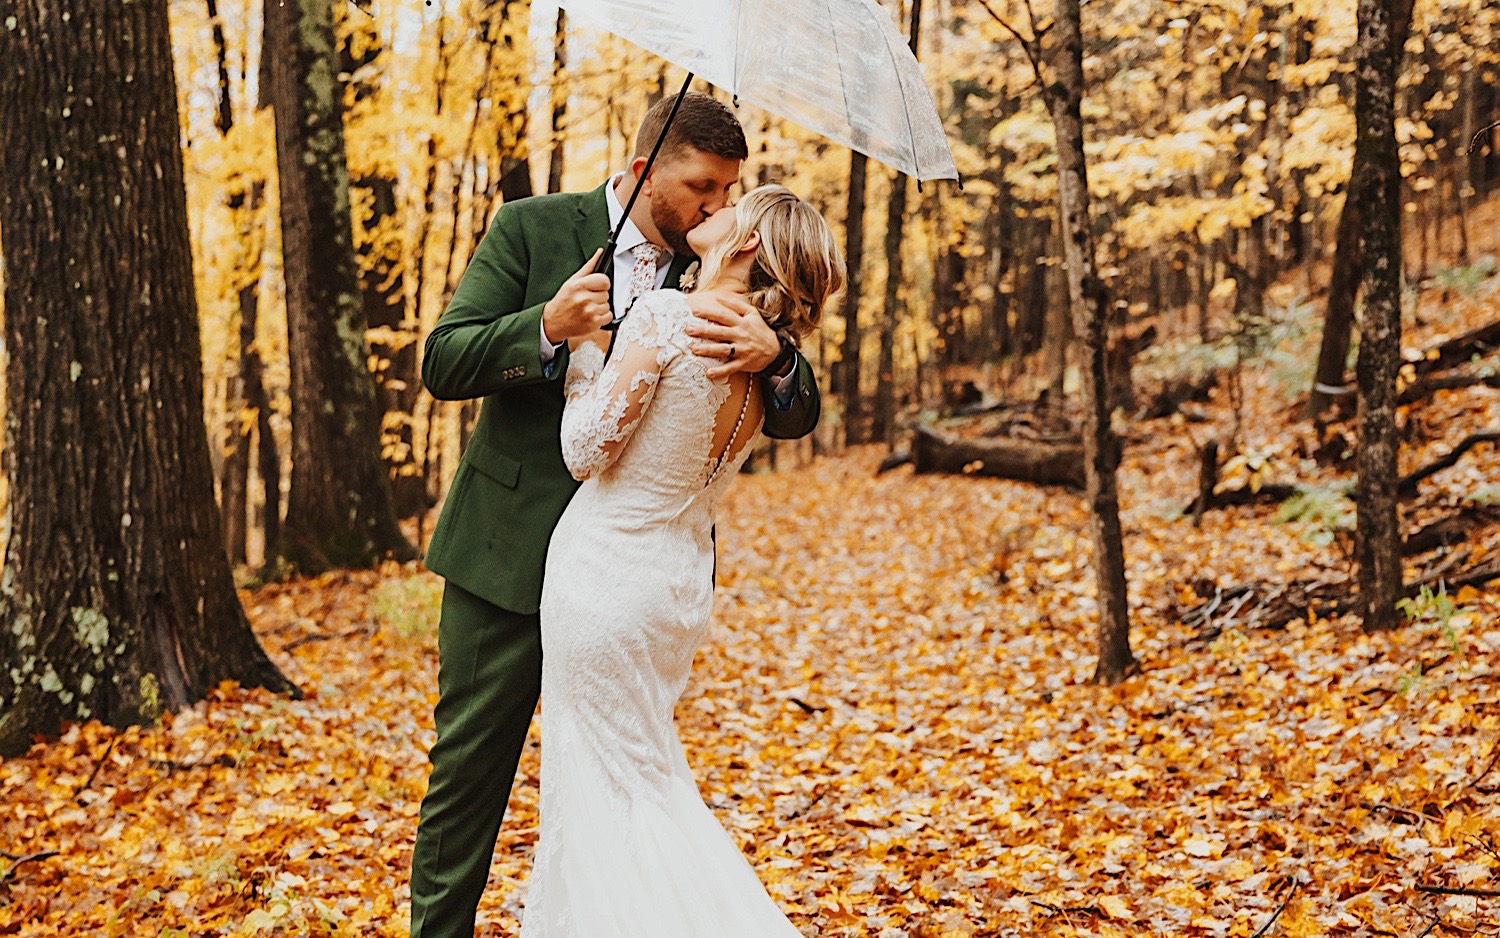 A bride and groom kiss one another while under an umbrella in the middle of a forest covered in yellow leaves during their wedding at Lake Bomoseen Lodge in Vermont